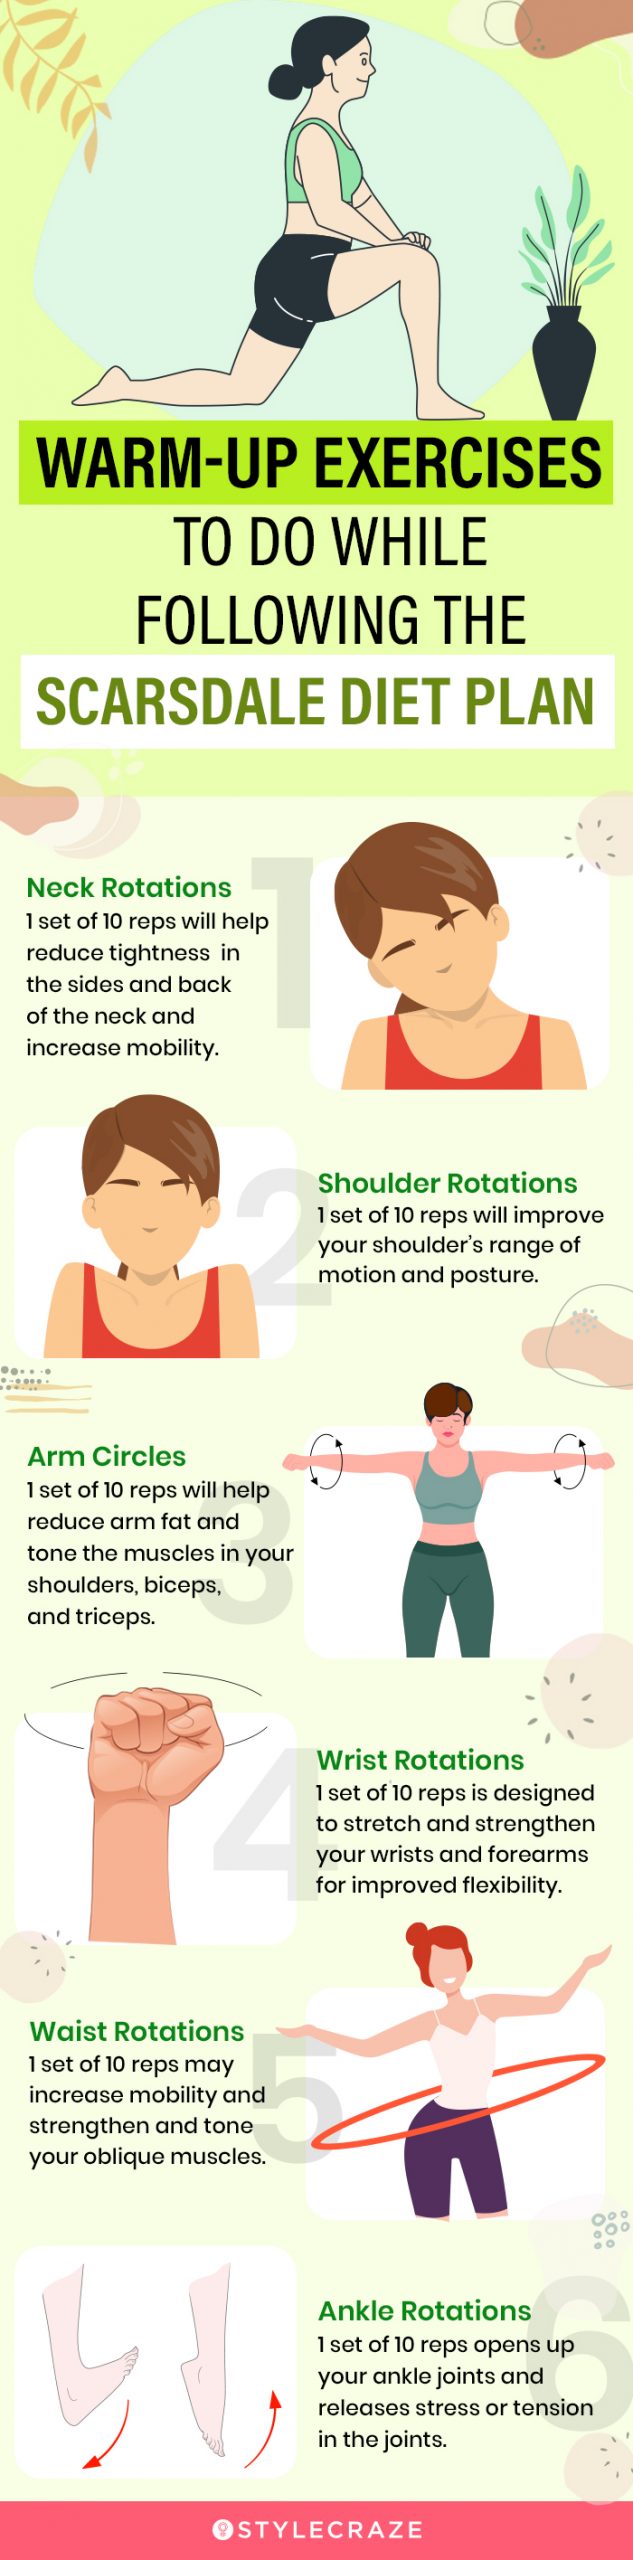 warm up exercises which are included everyday in scarsdale diet plan (infographic)